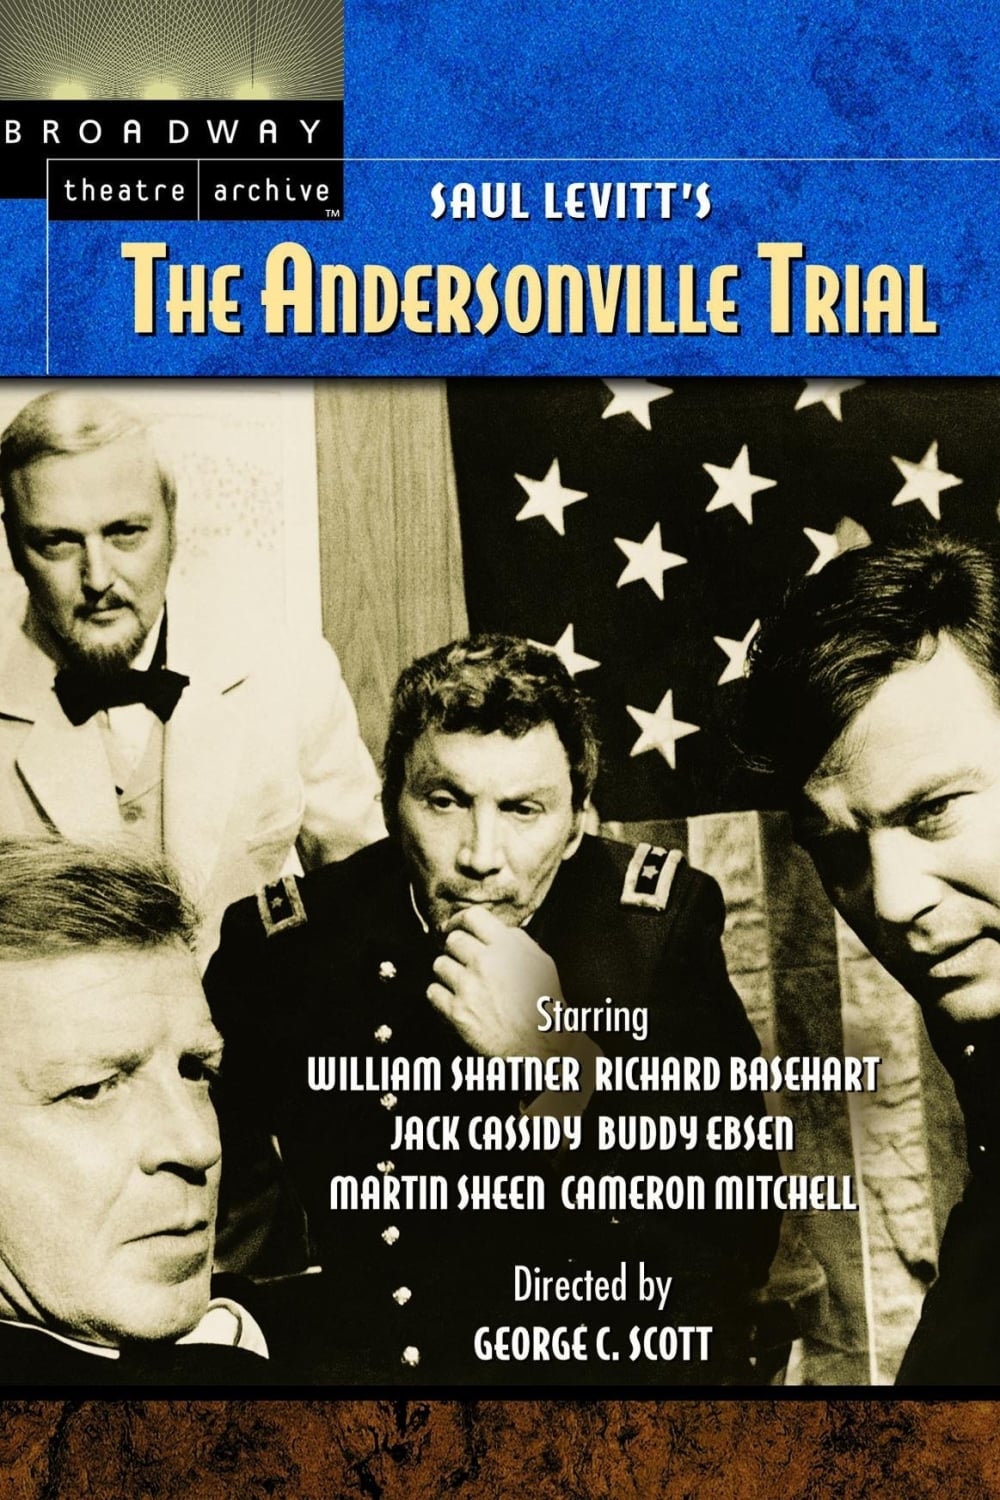 The Andersonville Trial film